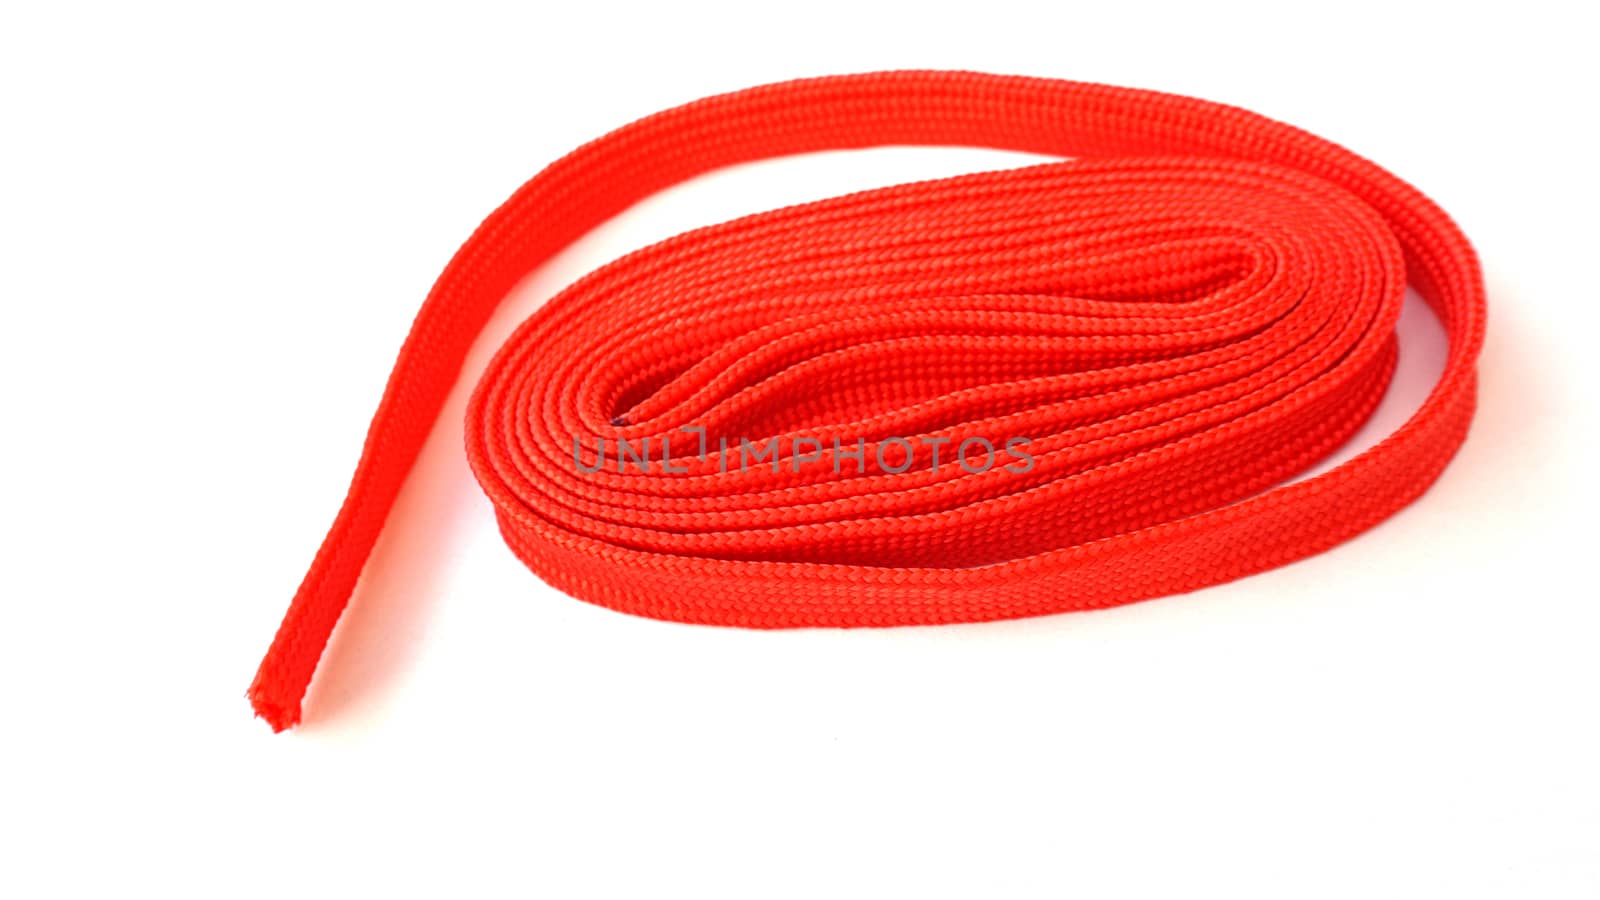 Red rope on white background. Fabric rope in red color folded in a coil.